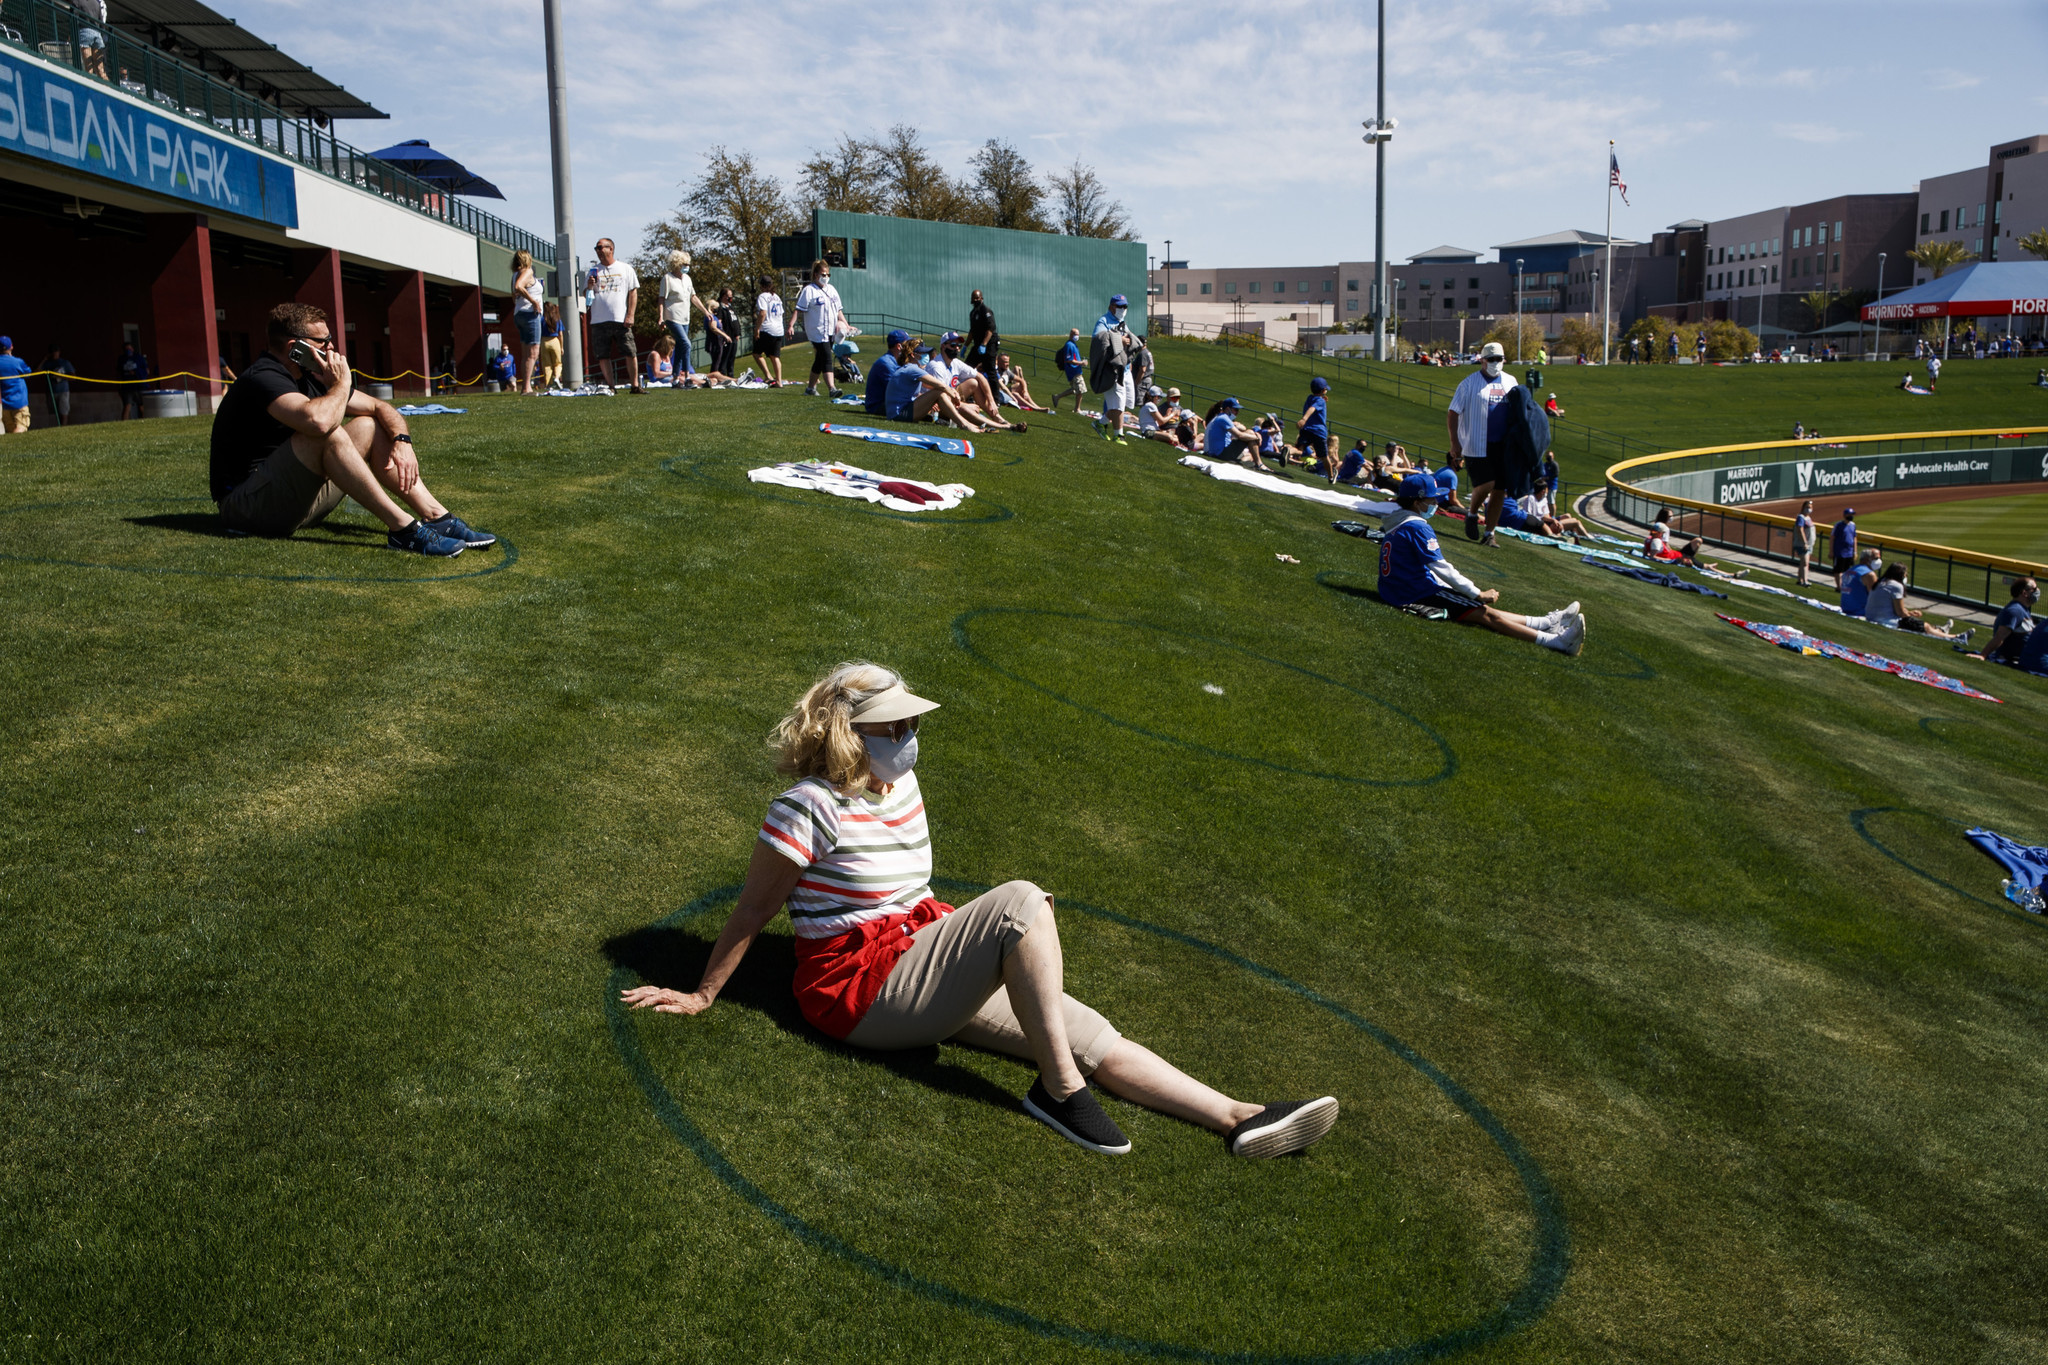 Outfield grass seats, Cactus League spring training baseball